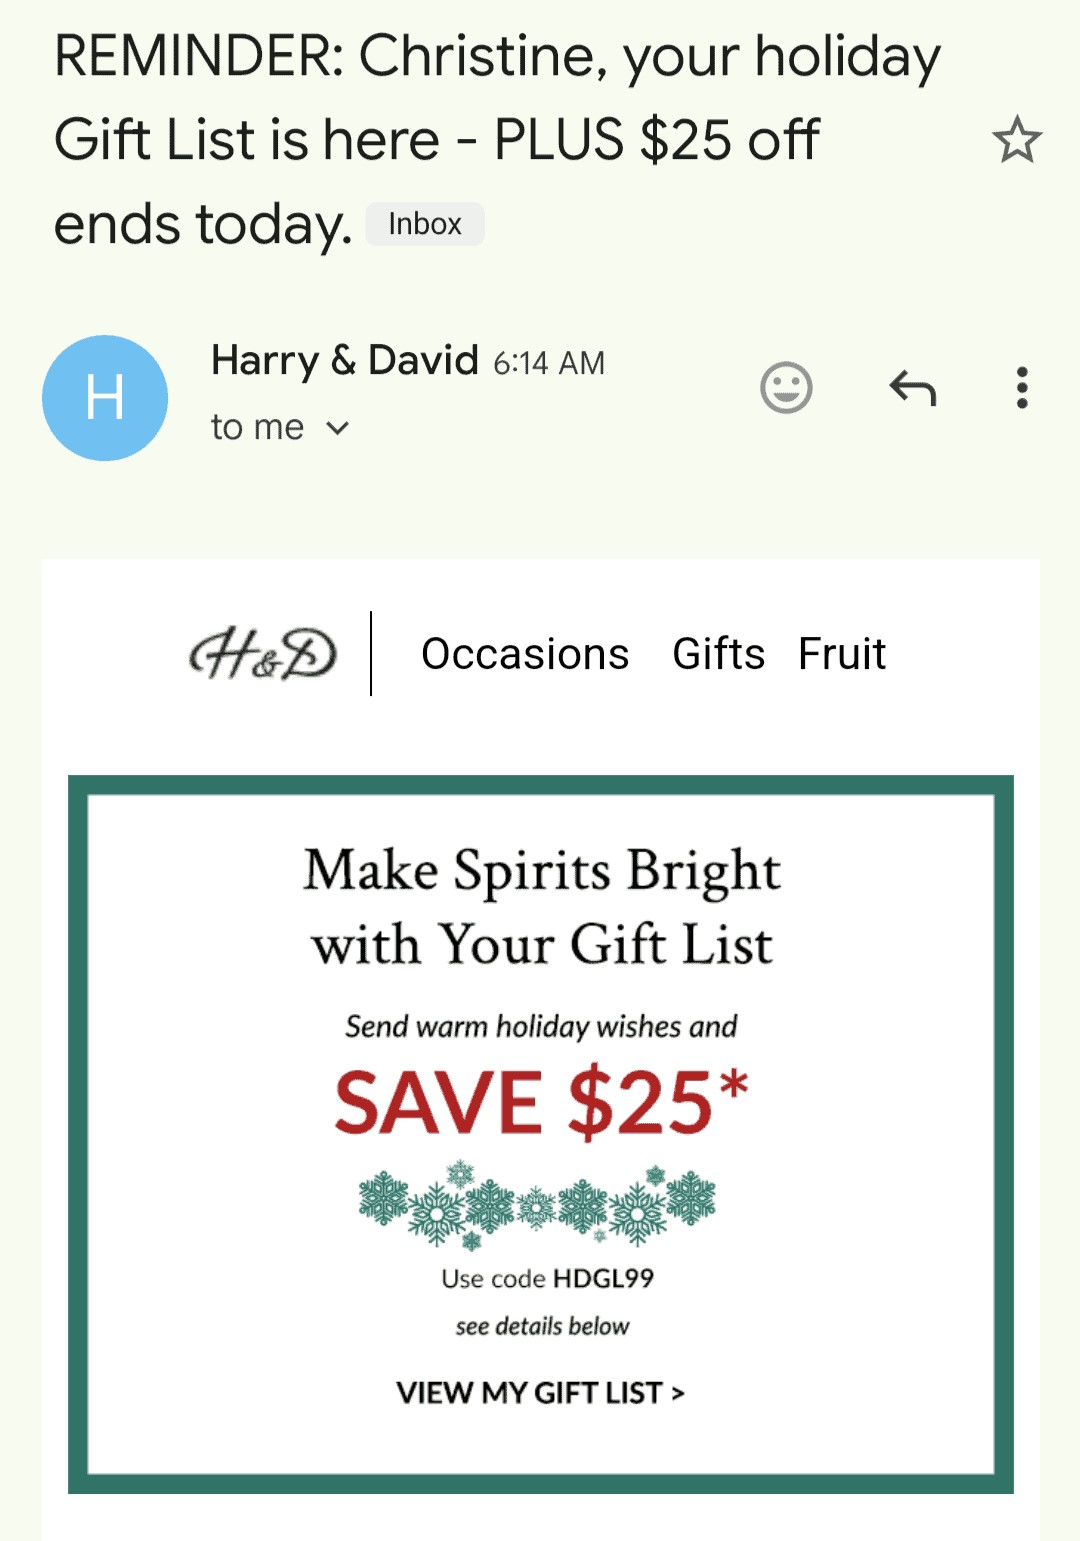 Harry & David's holiday list email to an user named Christine